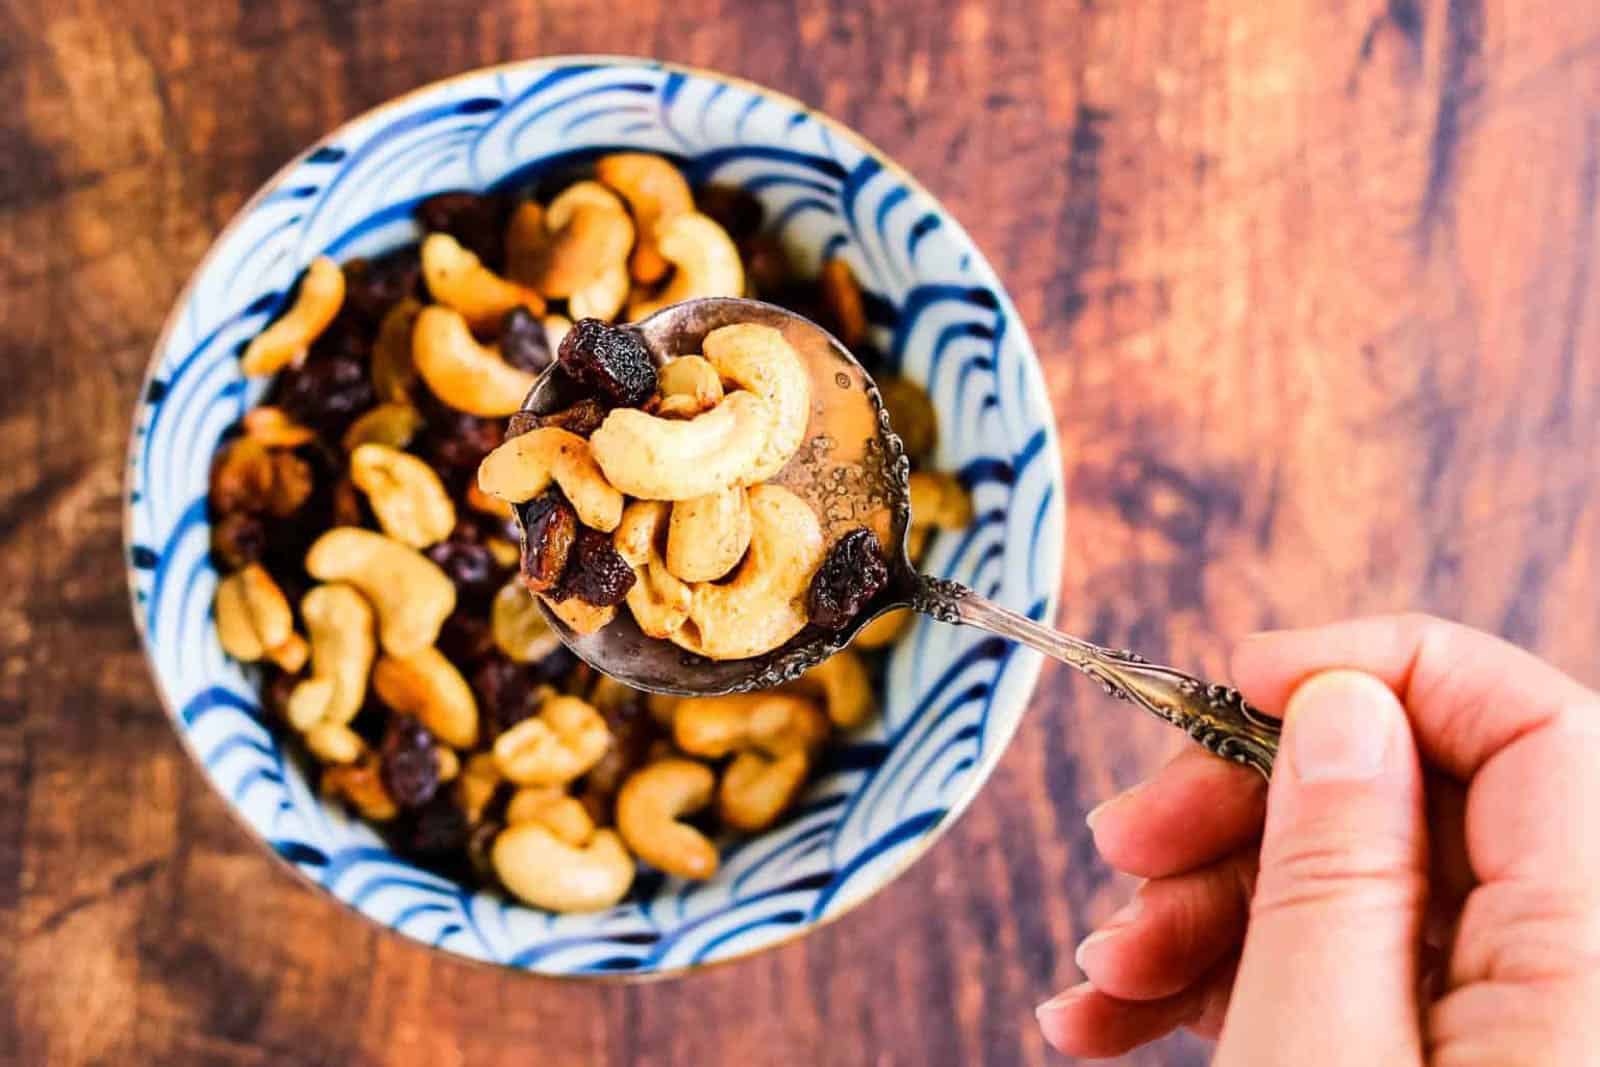 Caramelized cashews and raisins in a bowl with a silver spoon being lifted.